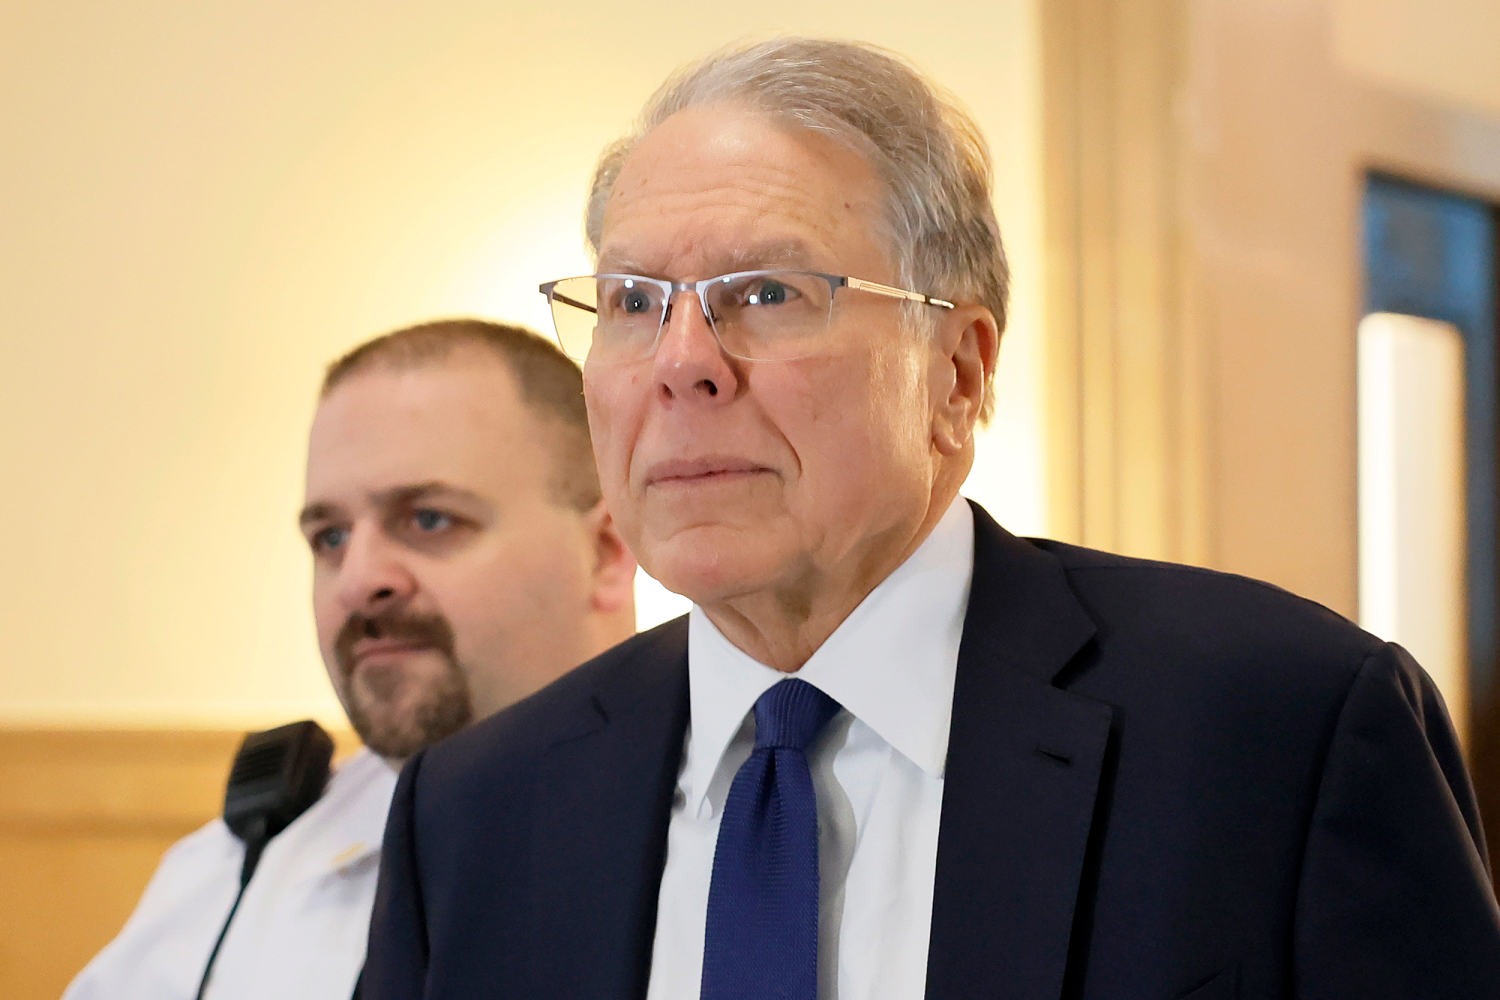 NRA and Wayne LaPierre accused in civil case of diverting millions to fund lavish spending